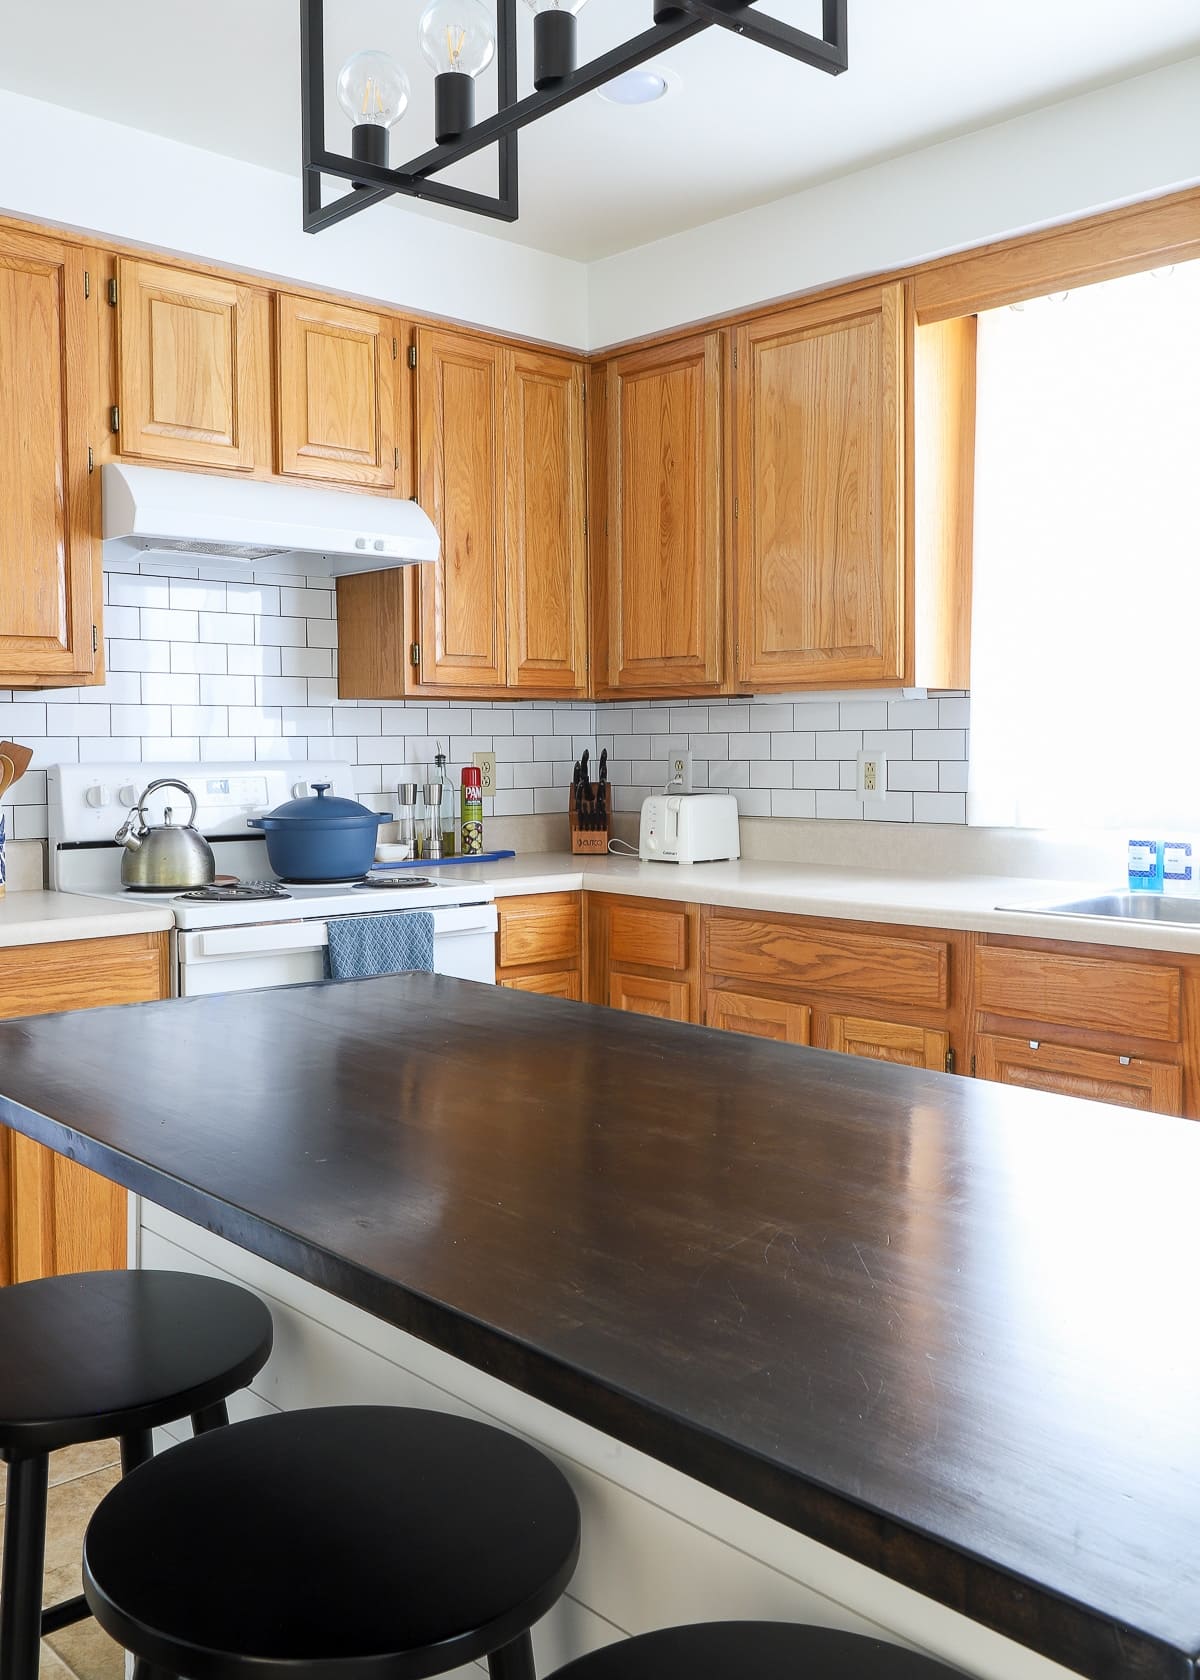 How to Install Butcher Block Countertops - Hey, Let's Make Stuff